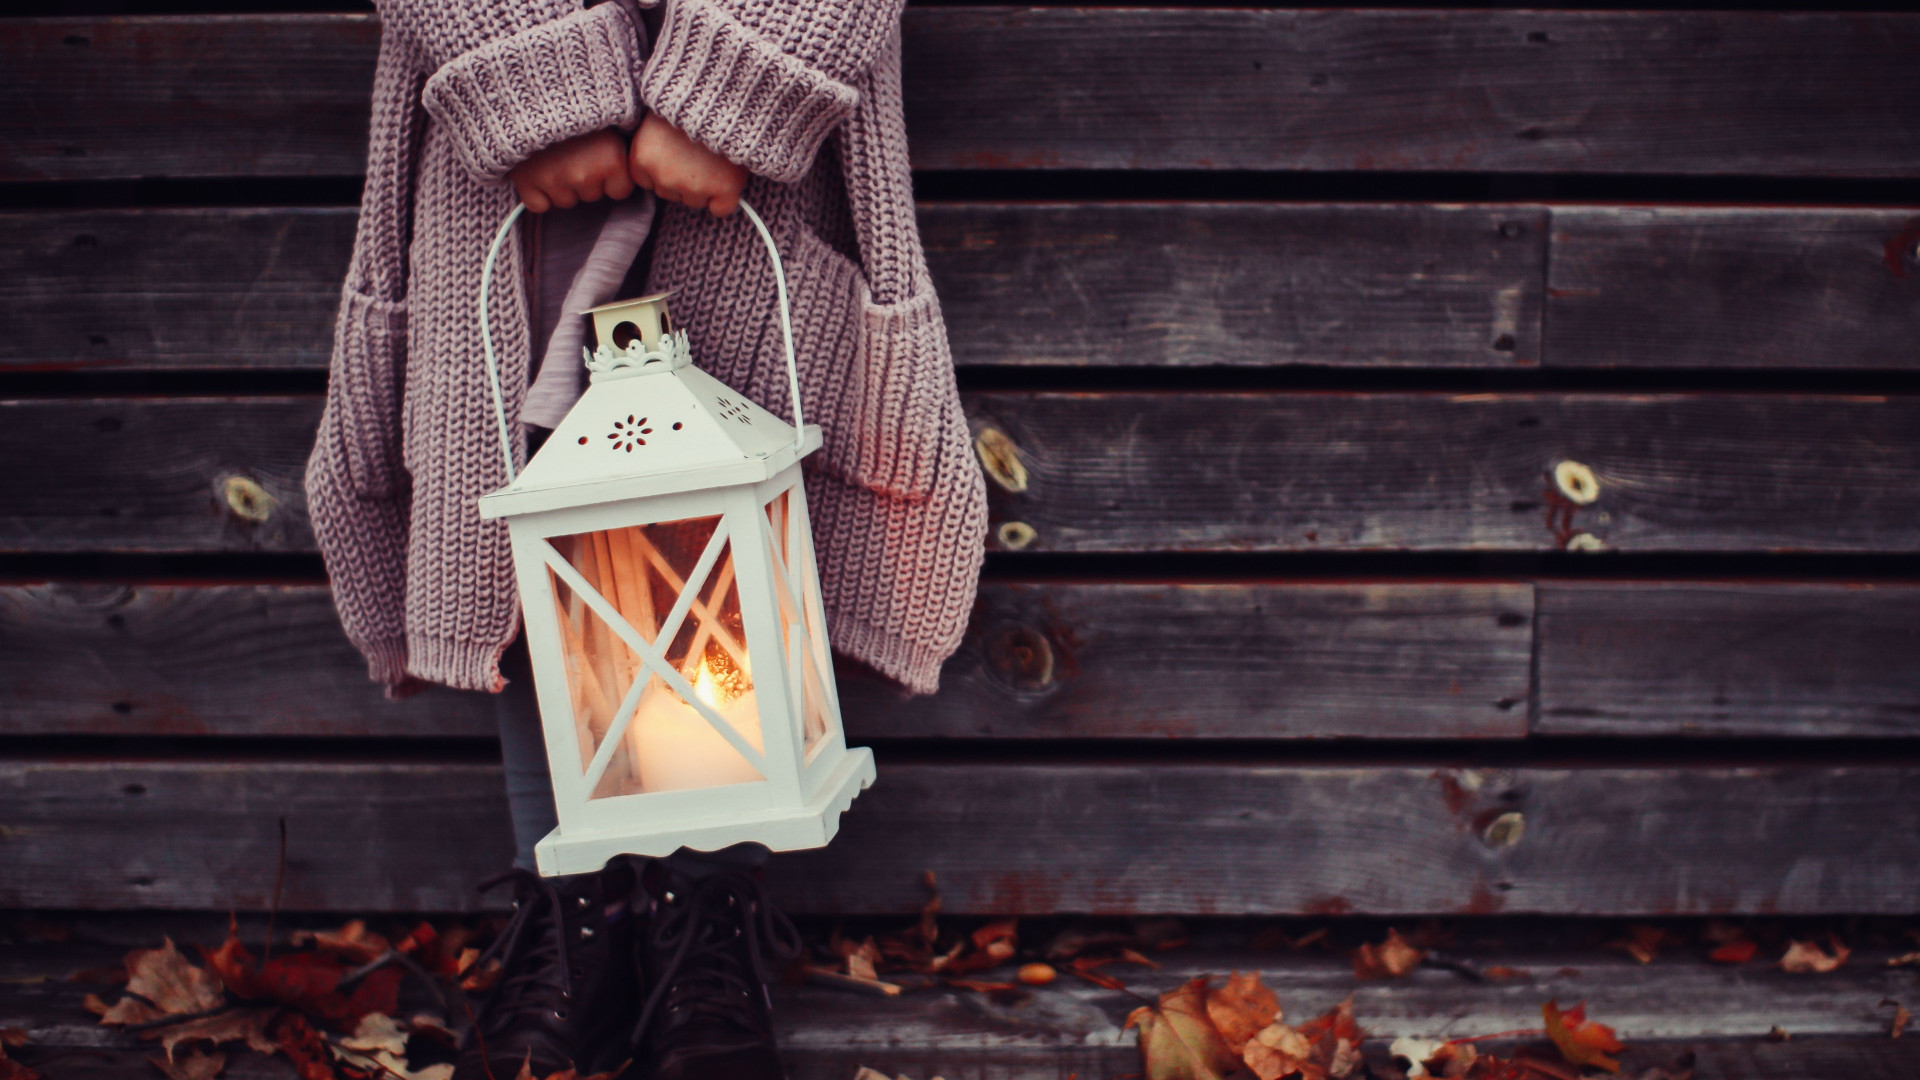 Download wallpaper: Autumn leaves and a child with lantern 1920x1080